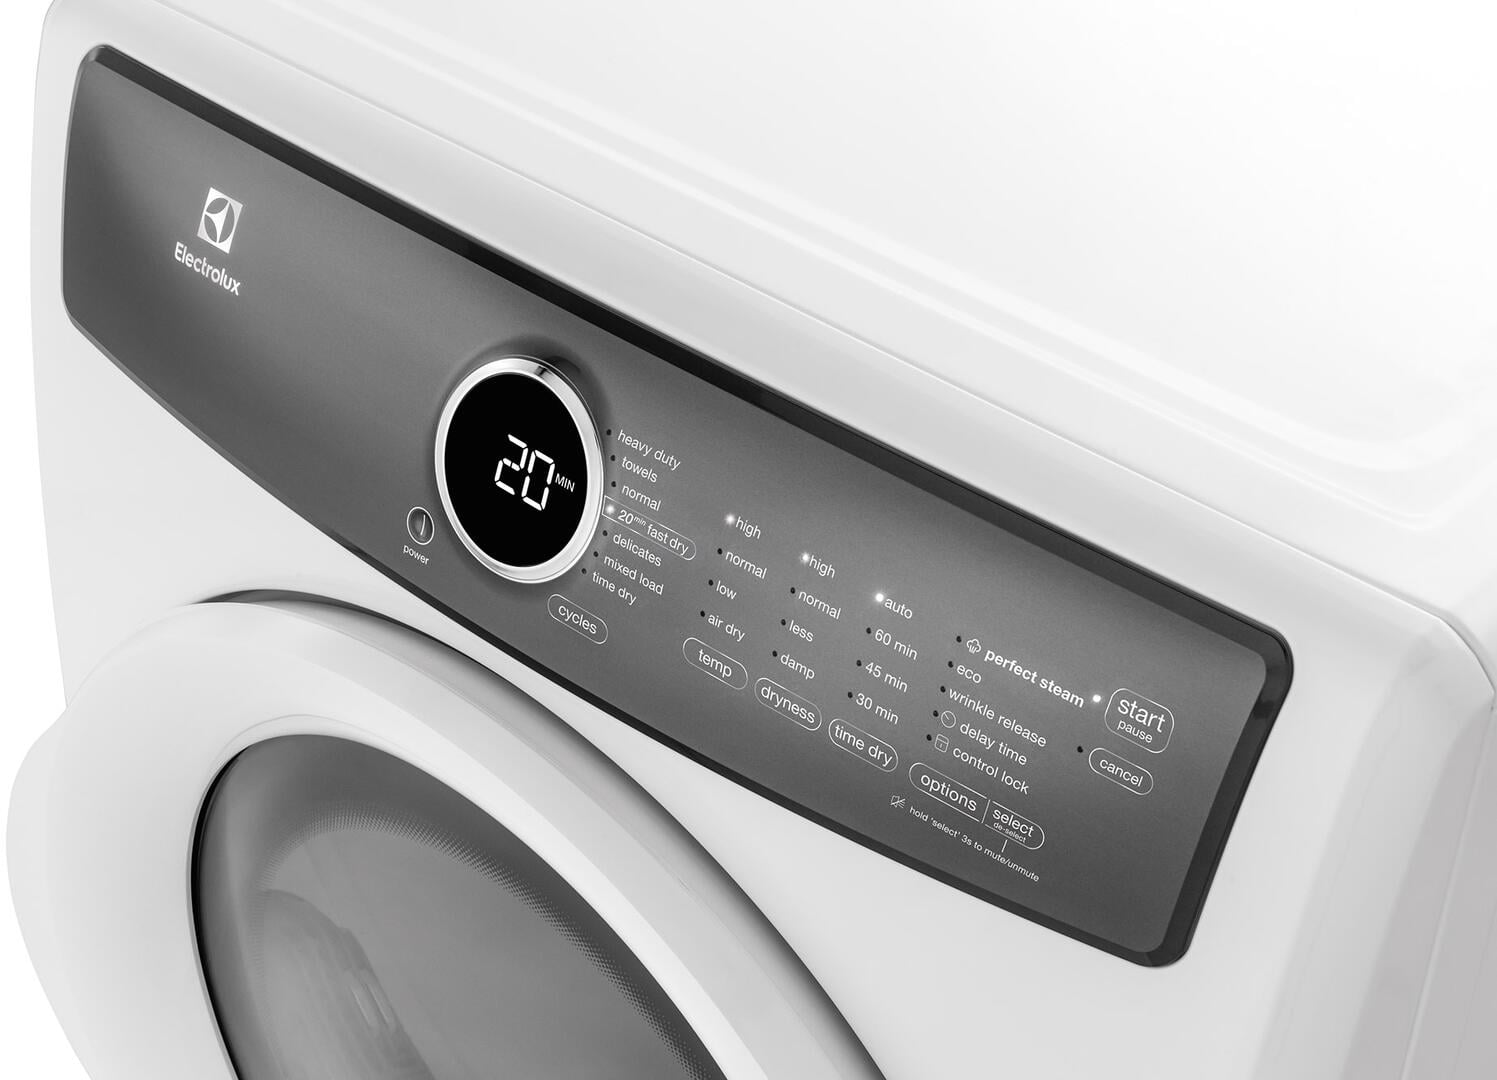 Front Load Perfect Steam™ Electric Dryer with Predictive Dry™ and Instant  Refresh – 8.0 Cu. Ft., Dryers